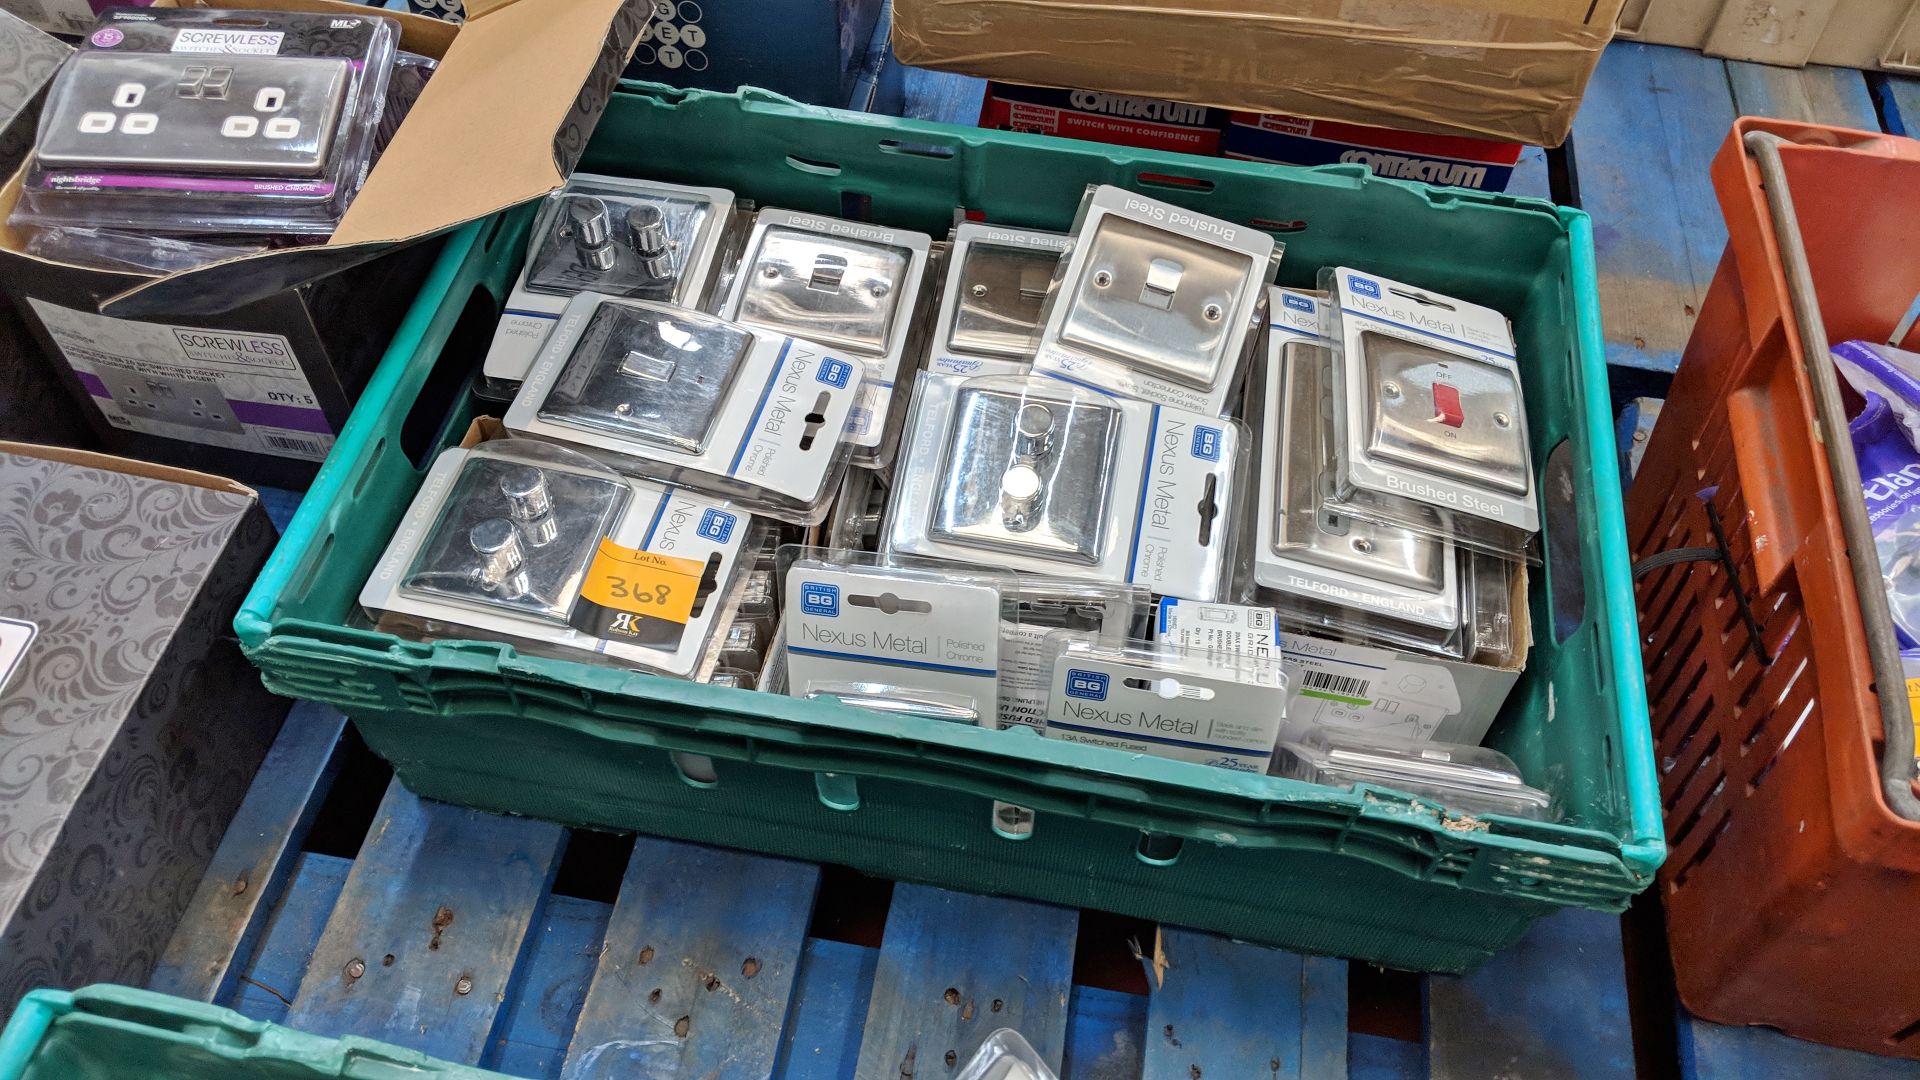 Quantity of assorted British General Nexus Metal switches and sockets - crate excluded The vast